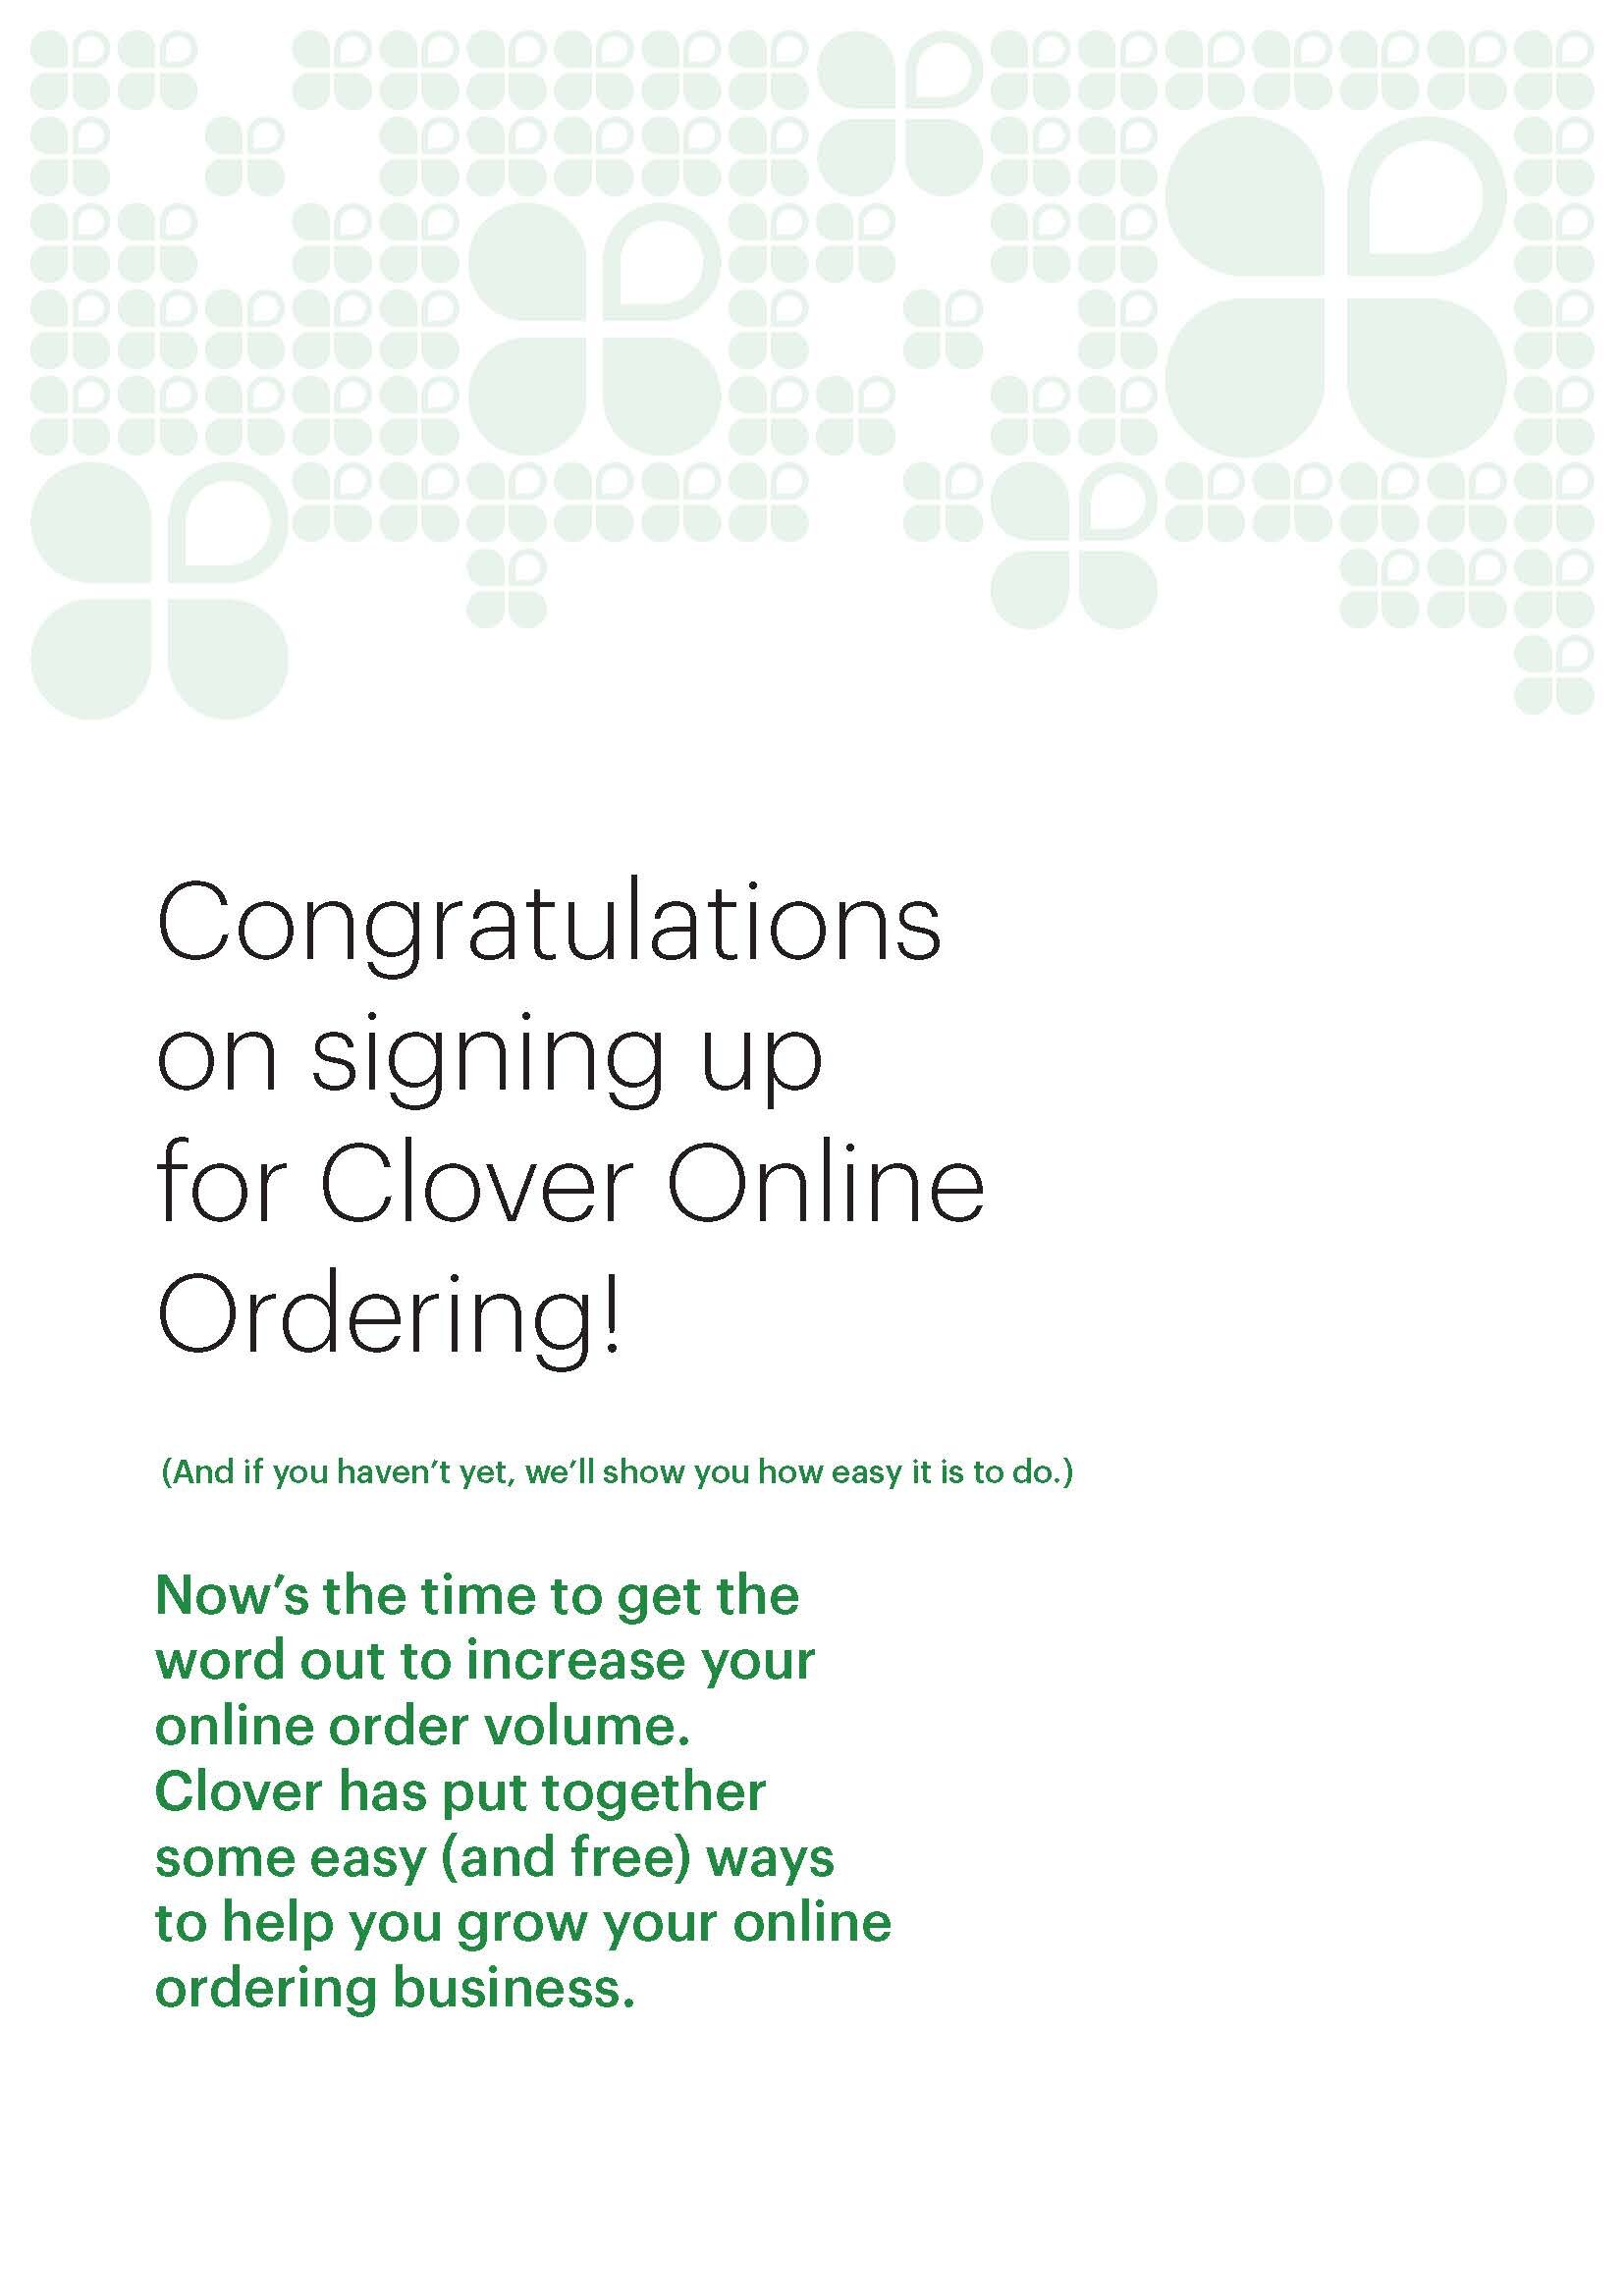 Drive Sales With Clover Online Ordering_Page_02.jpg